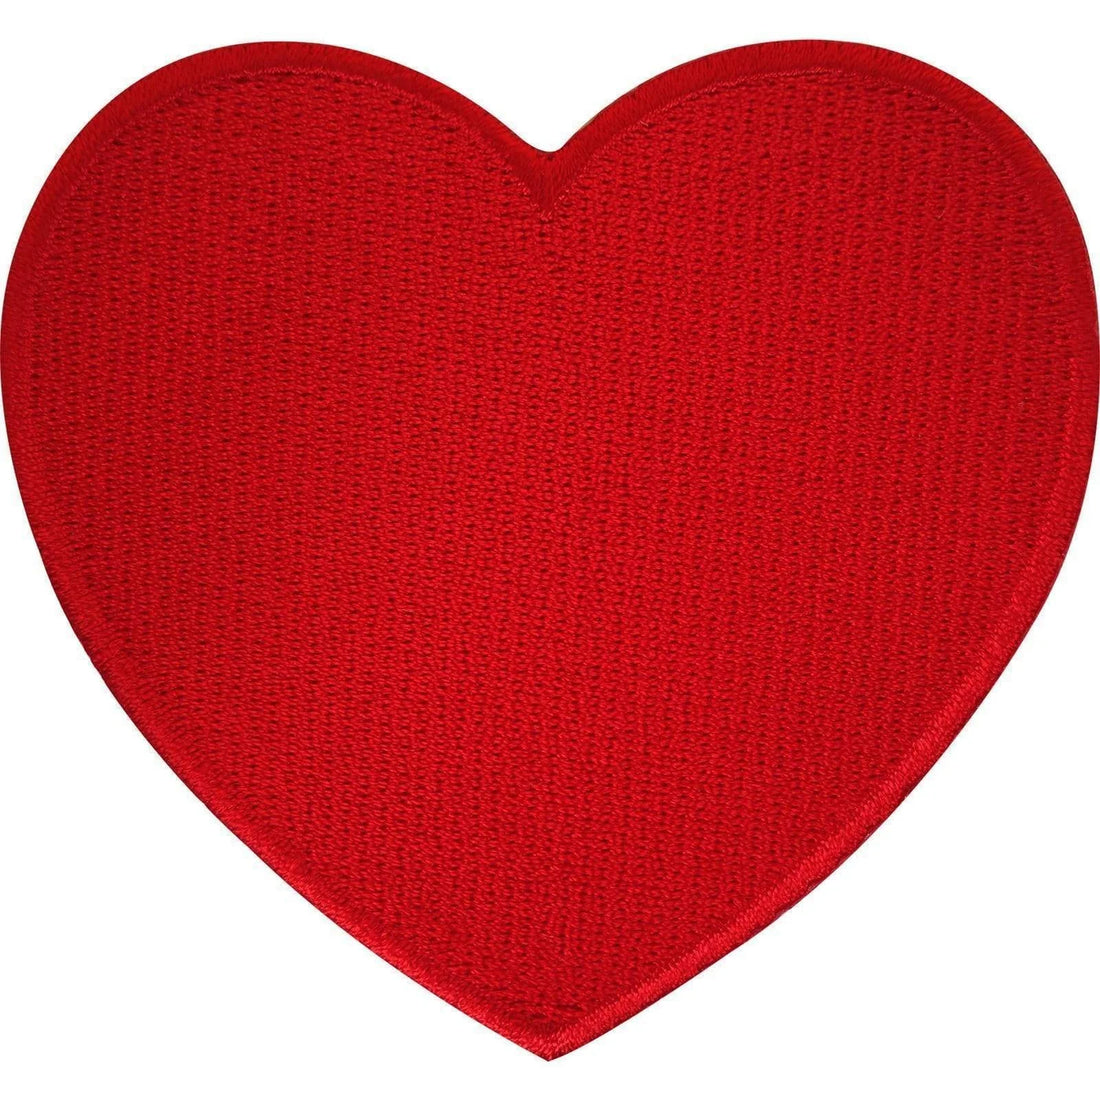 Stitching Love: The Art of Valentine's Day Patches